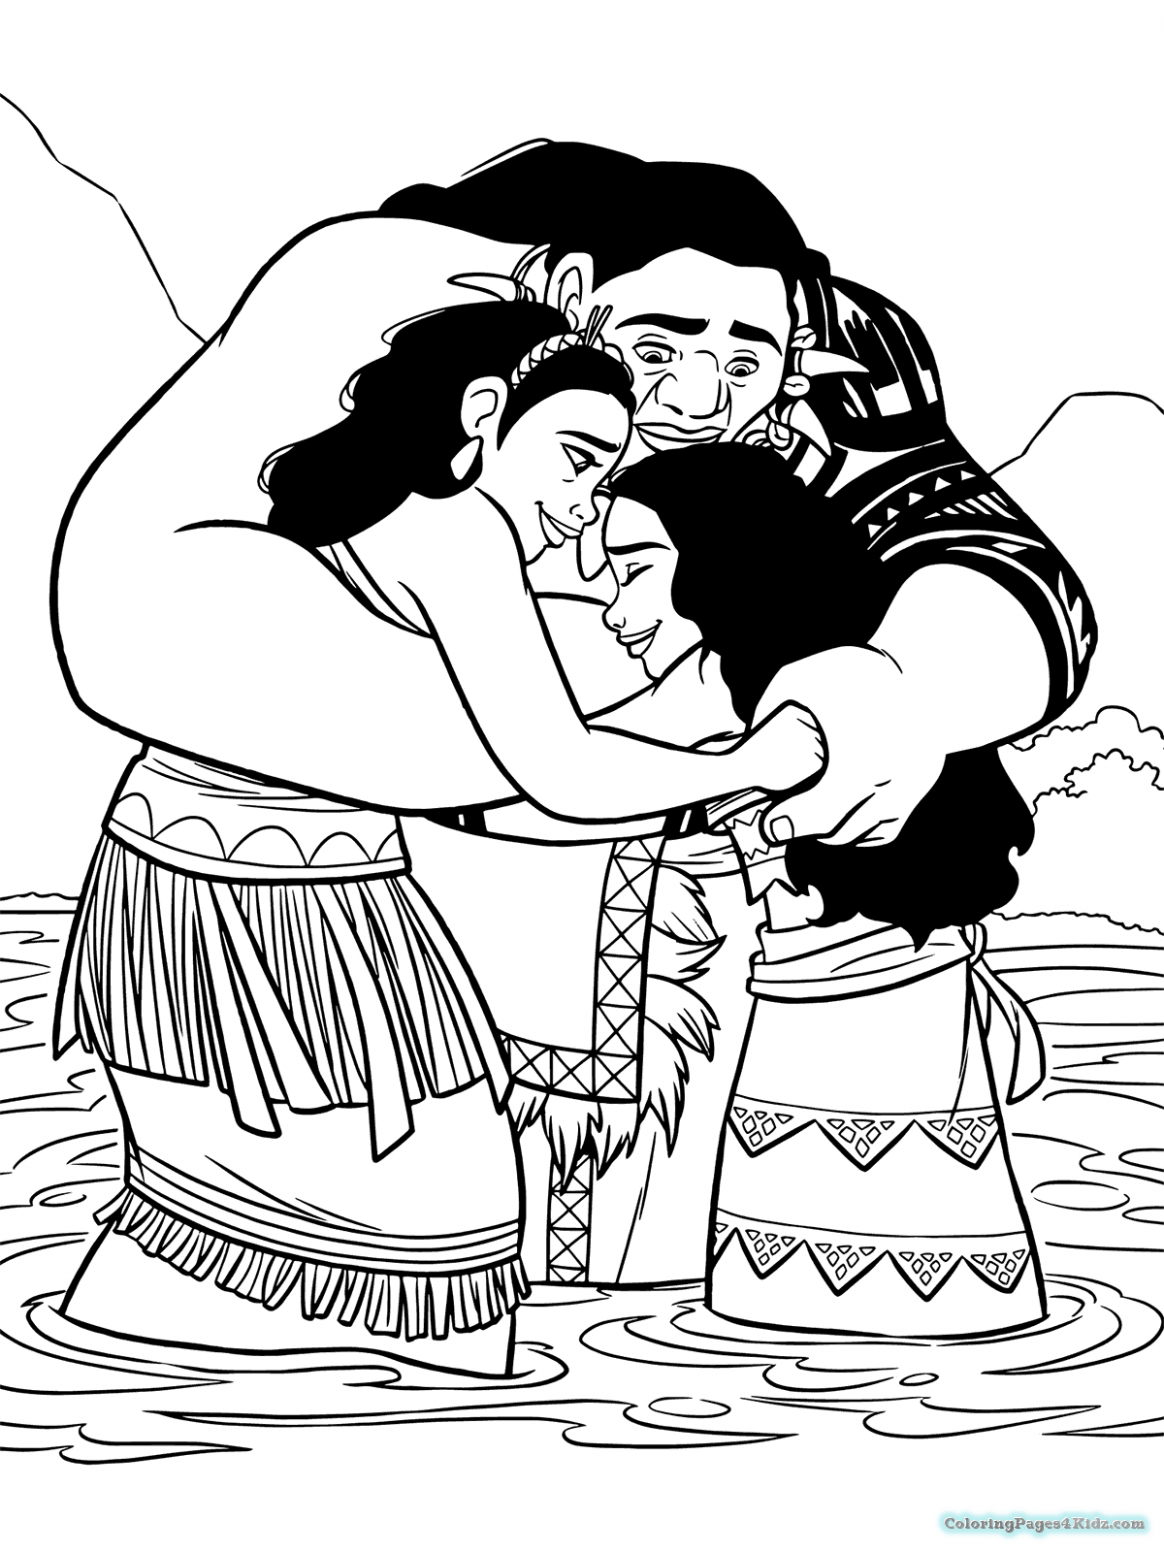 Moana Family Coloring Page